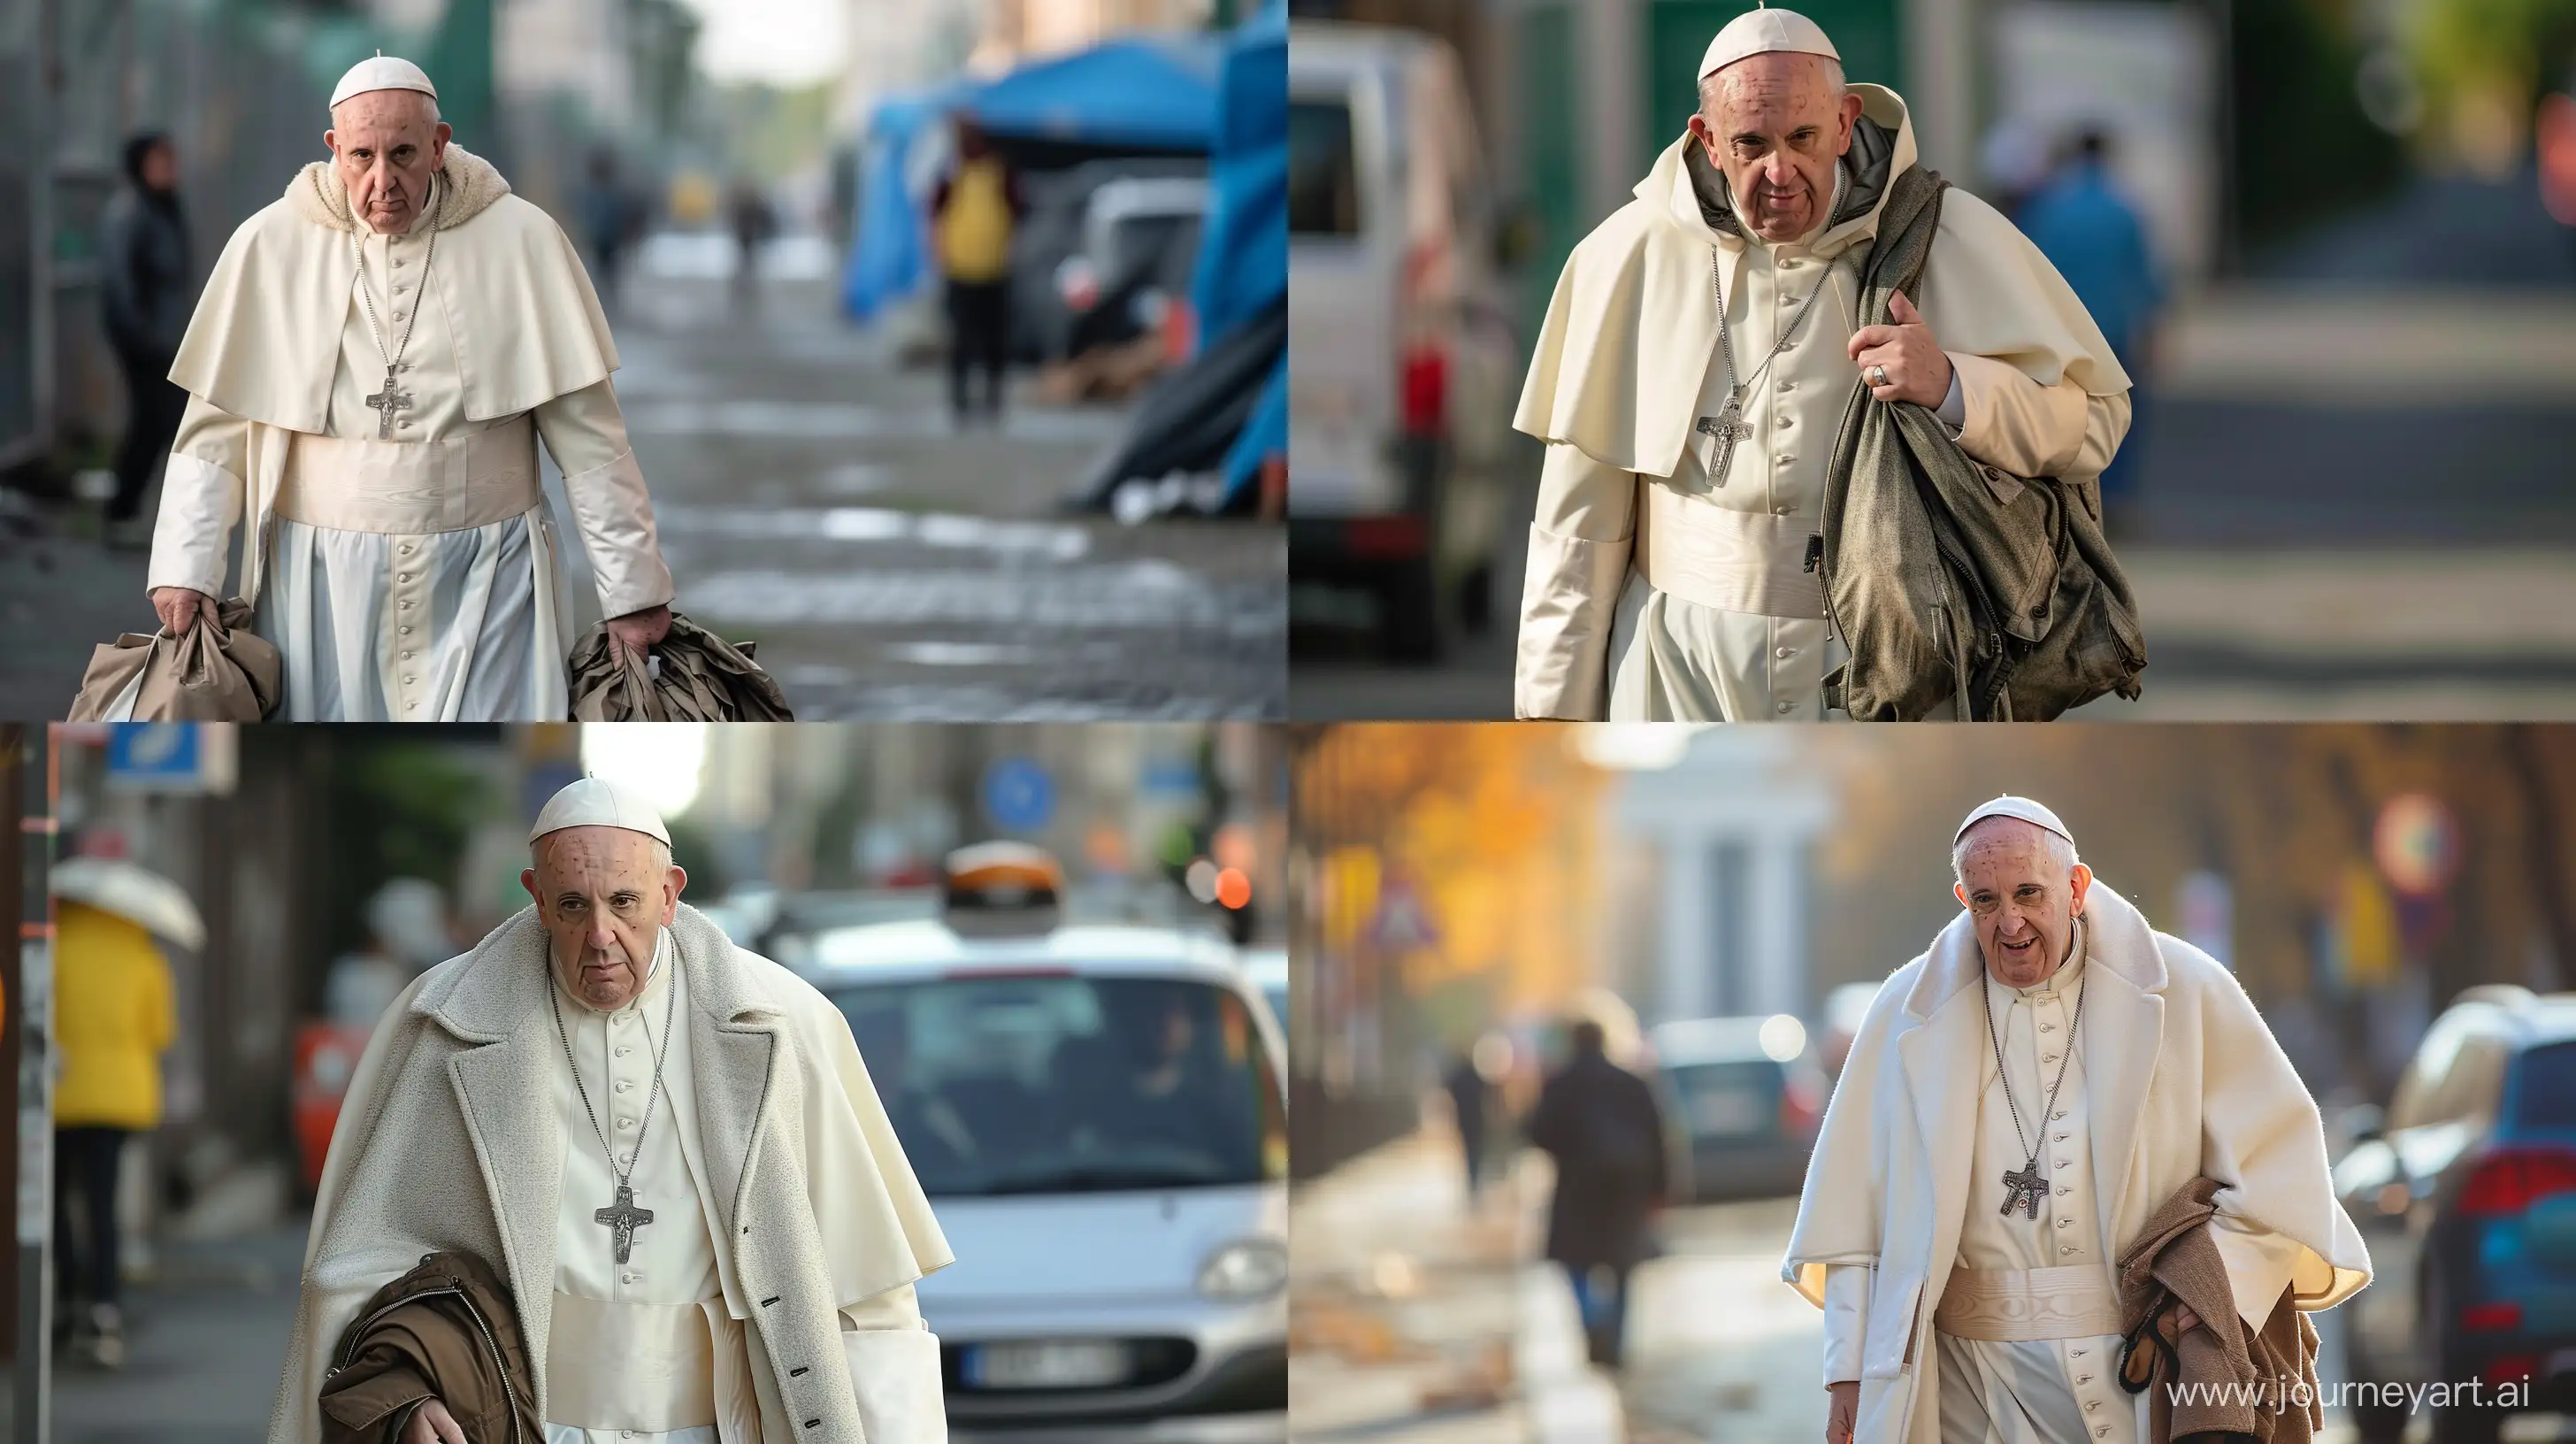 Pope-in-Humble-Attire-Strolling-Through-the-City-Streets